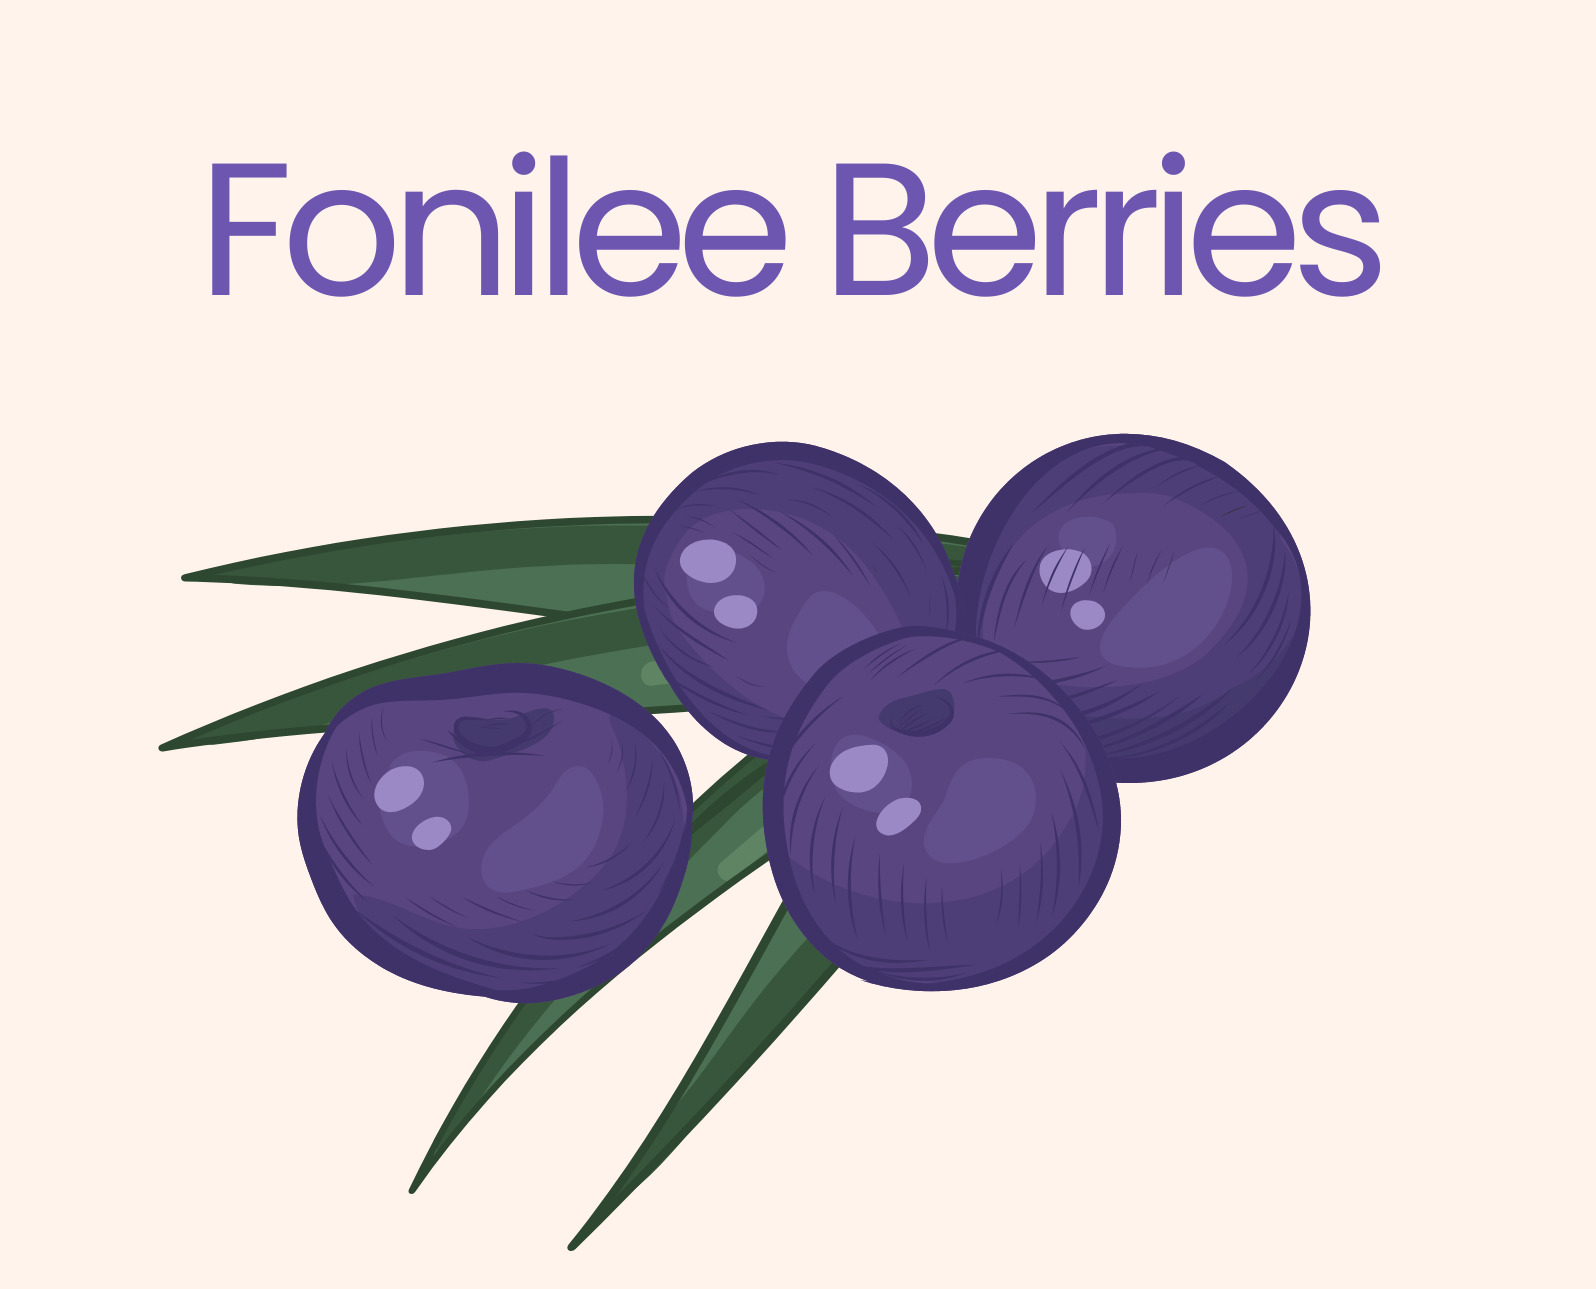 Fonilee Berries, a type of poison from Fourth Wing, the Empyrean Series by Rebecca Yarros